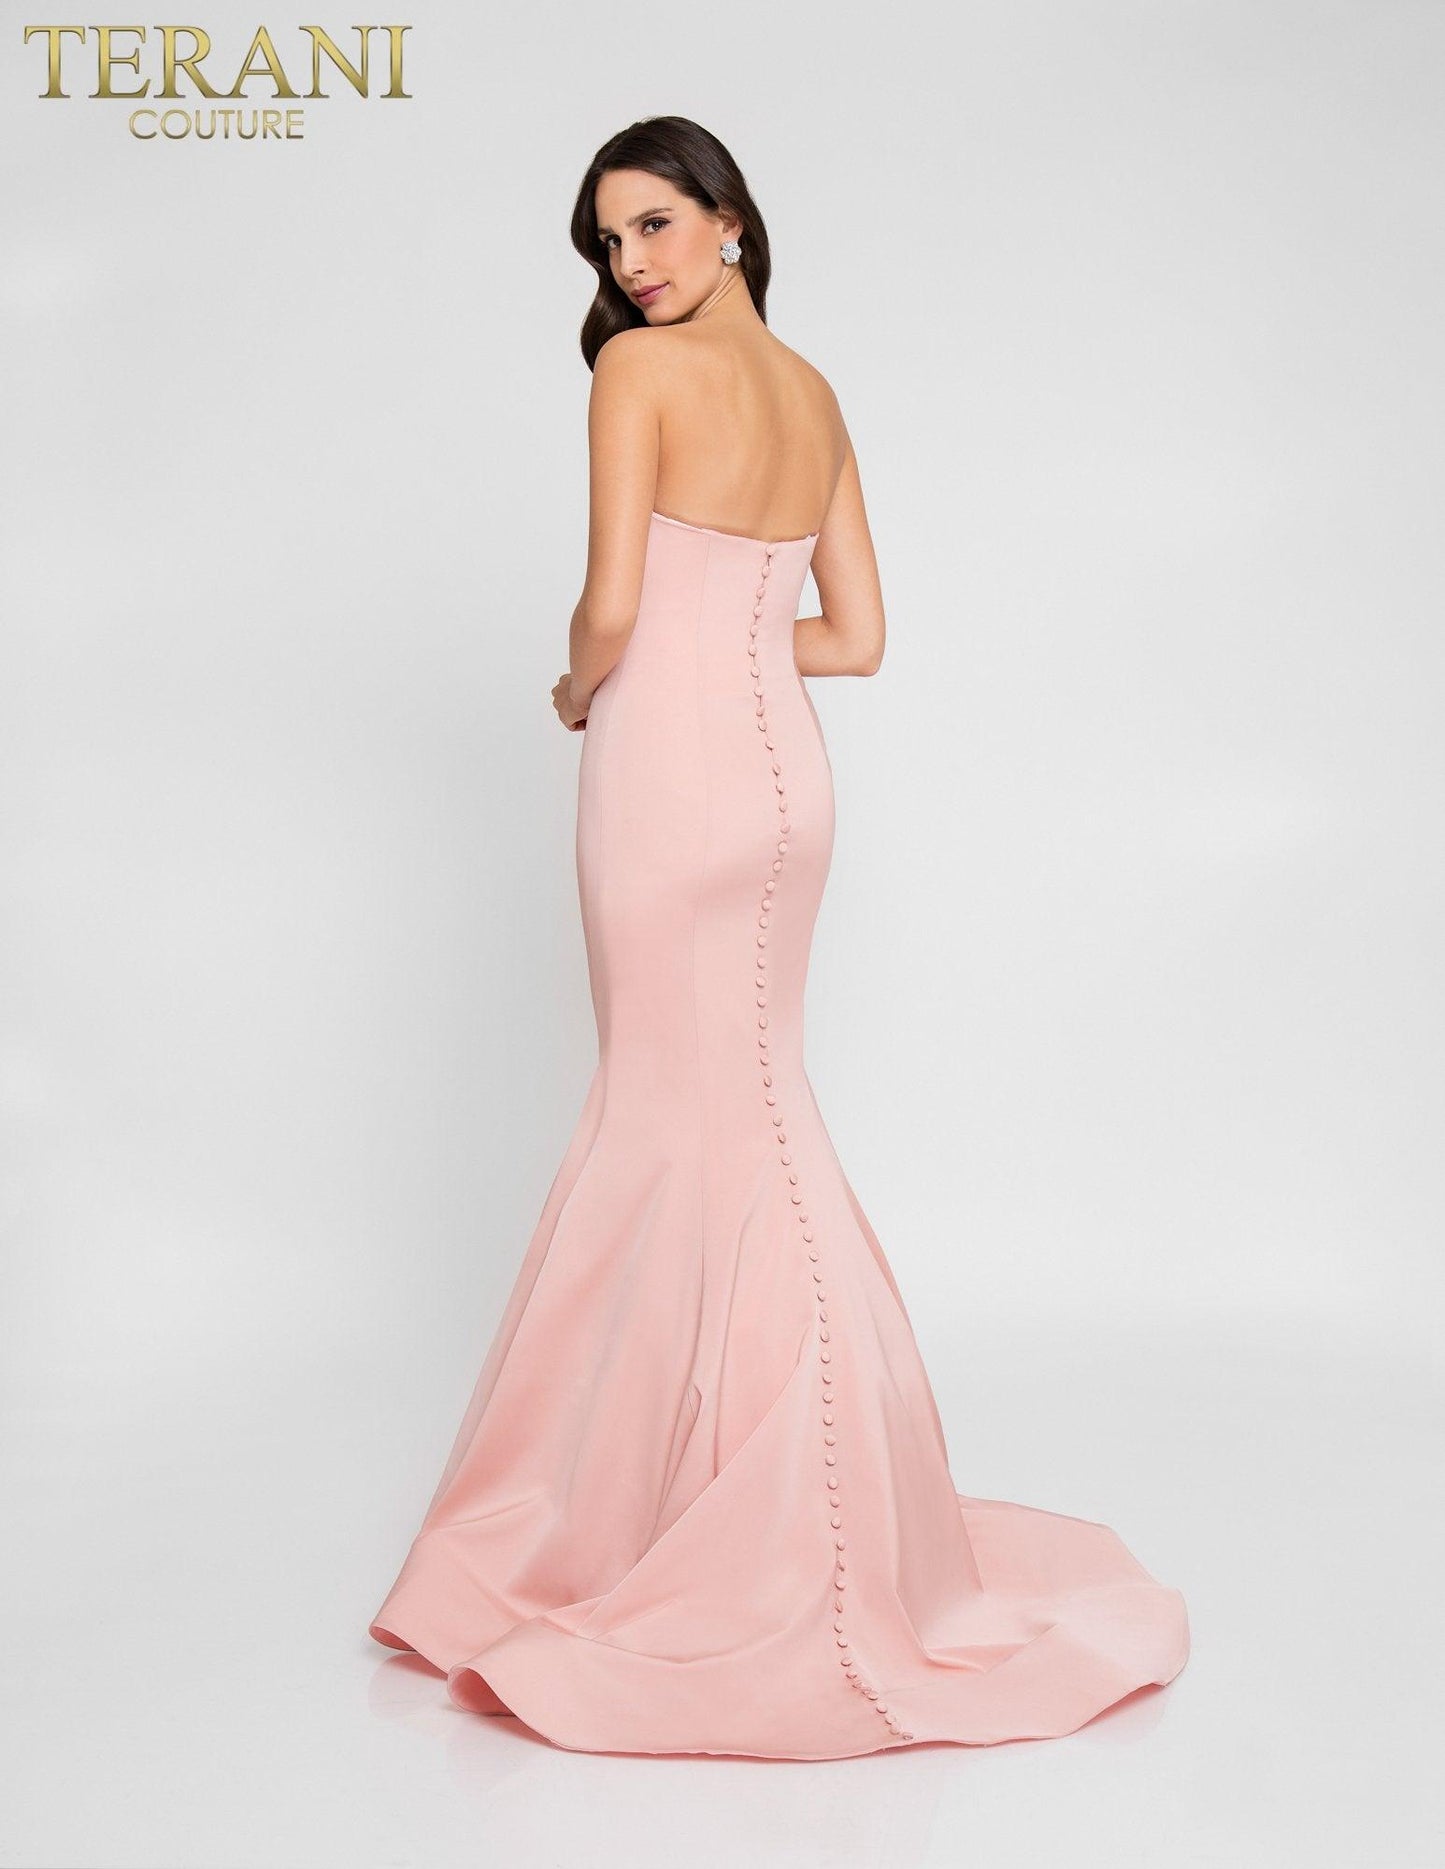 Terani Couture Formal Long Prom Dress 1812P5386 - The Dress Outlet